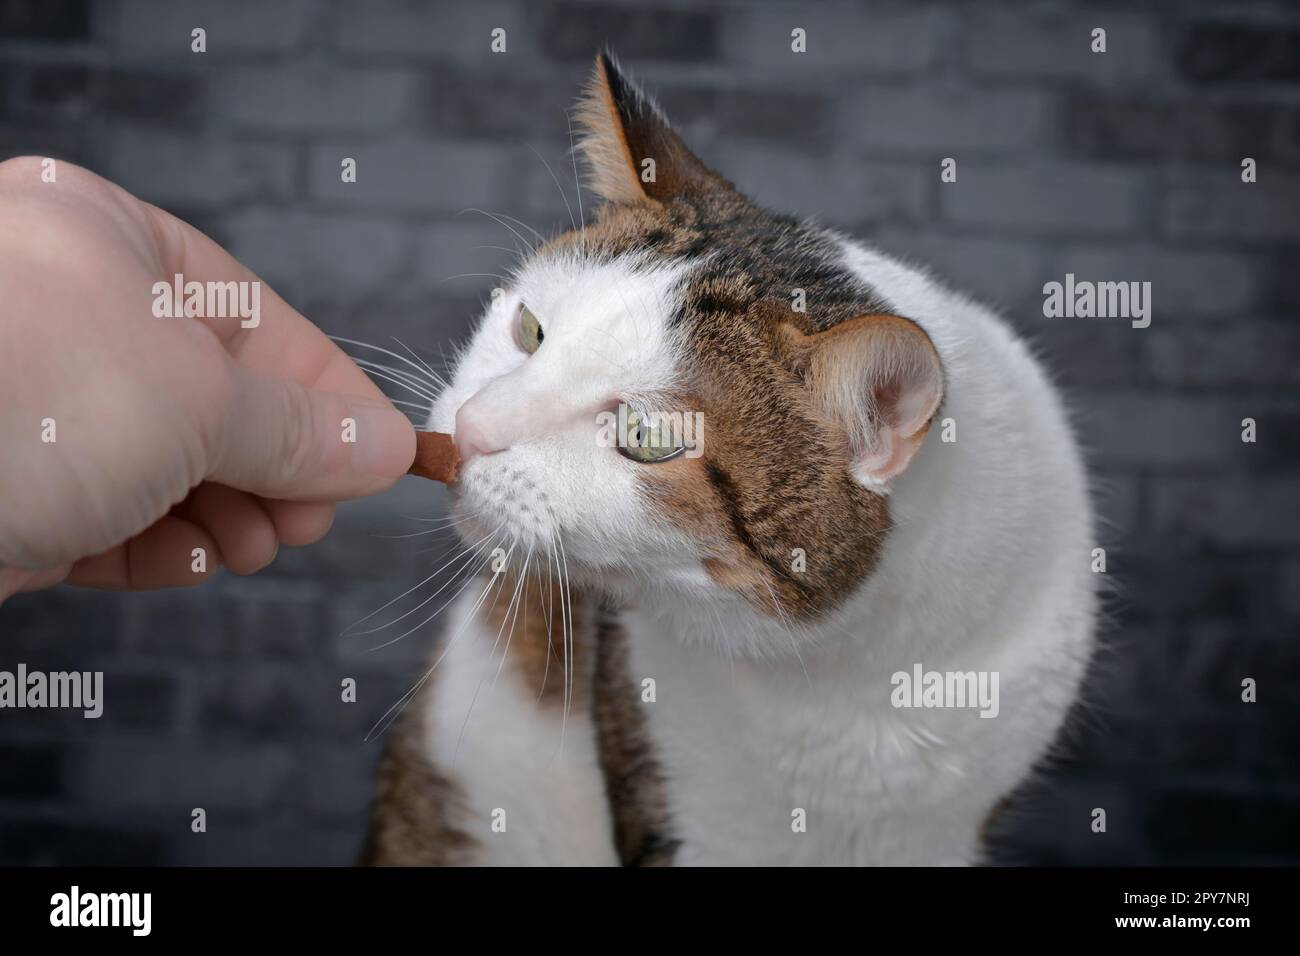 Cute tabby cat eating favorite treat from hand of owner. Stock Photo